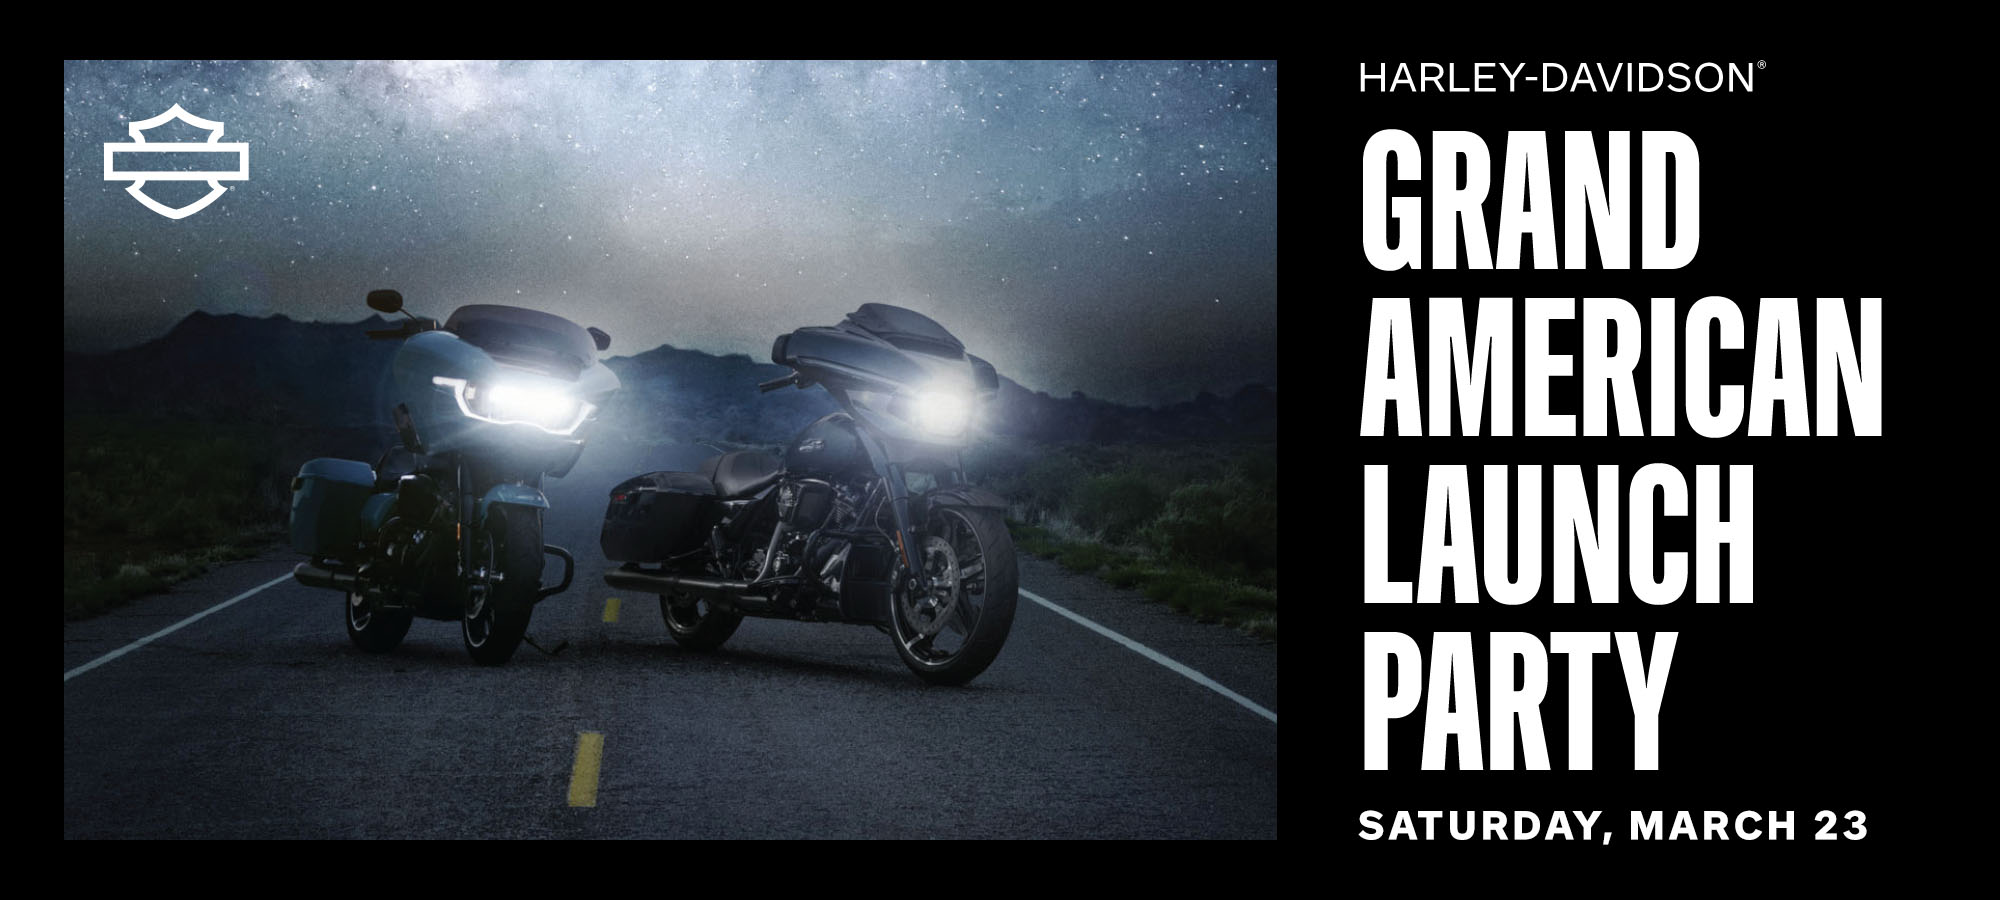 Grand American Launch Party on Saturday, March 23